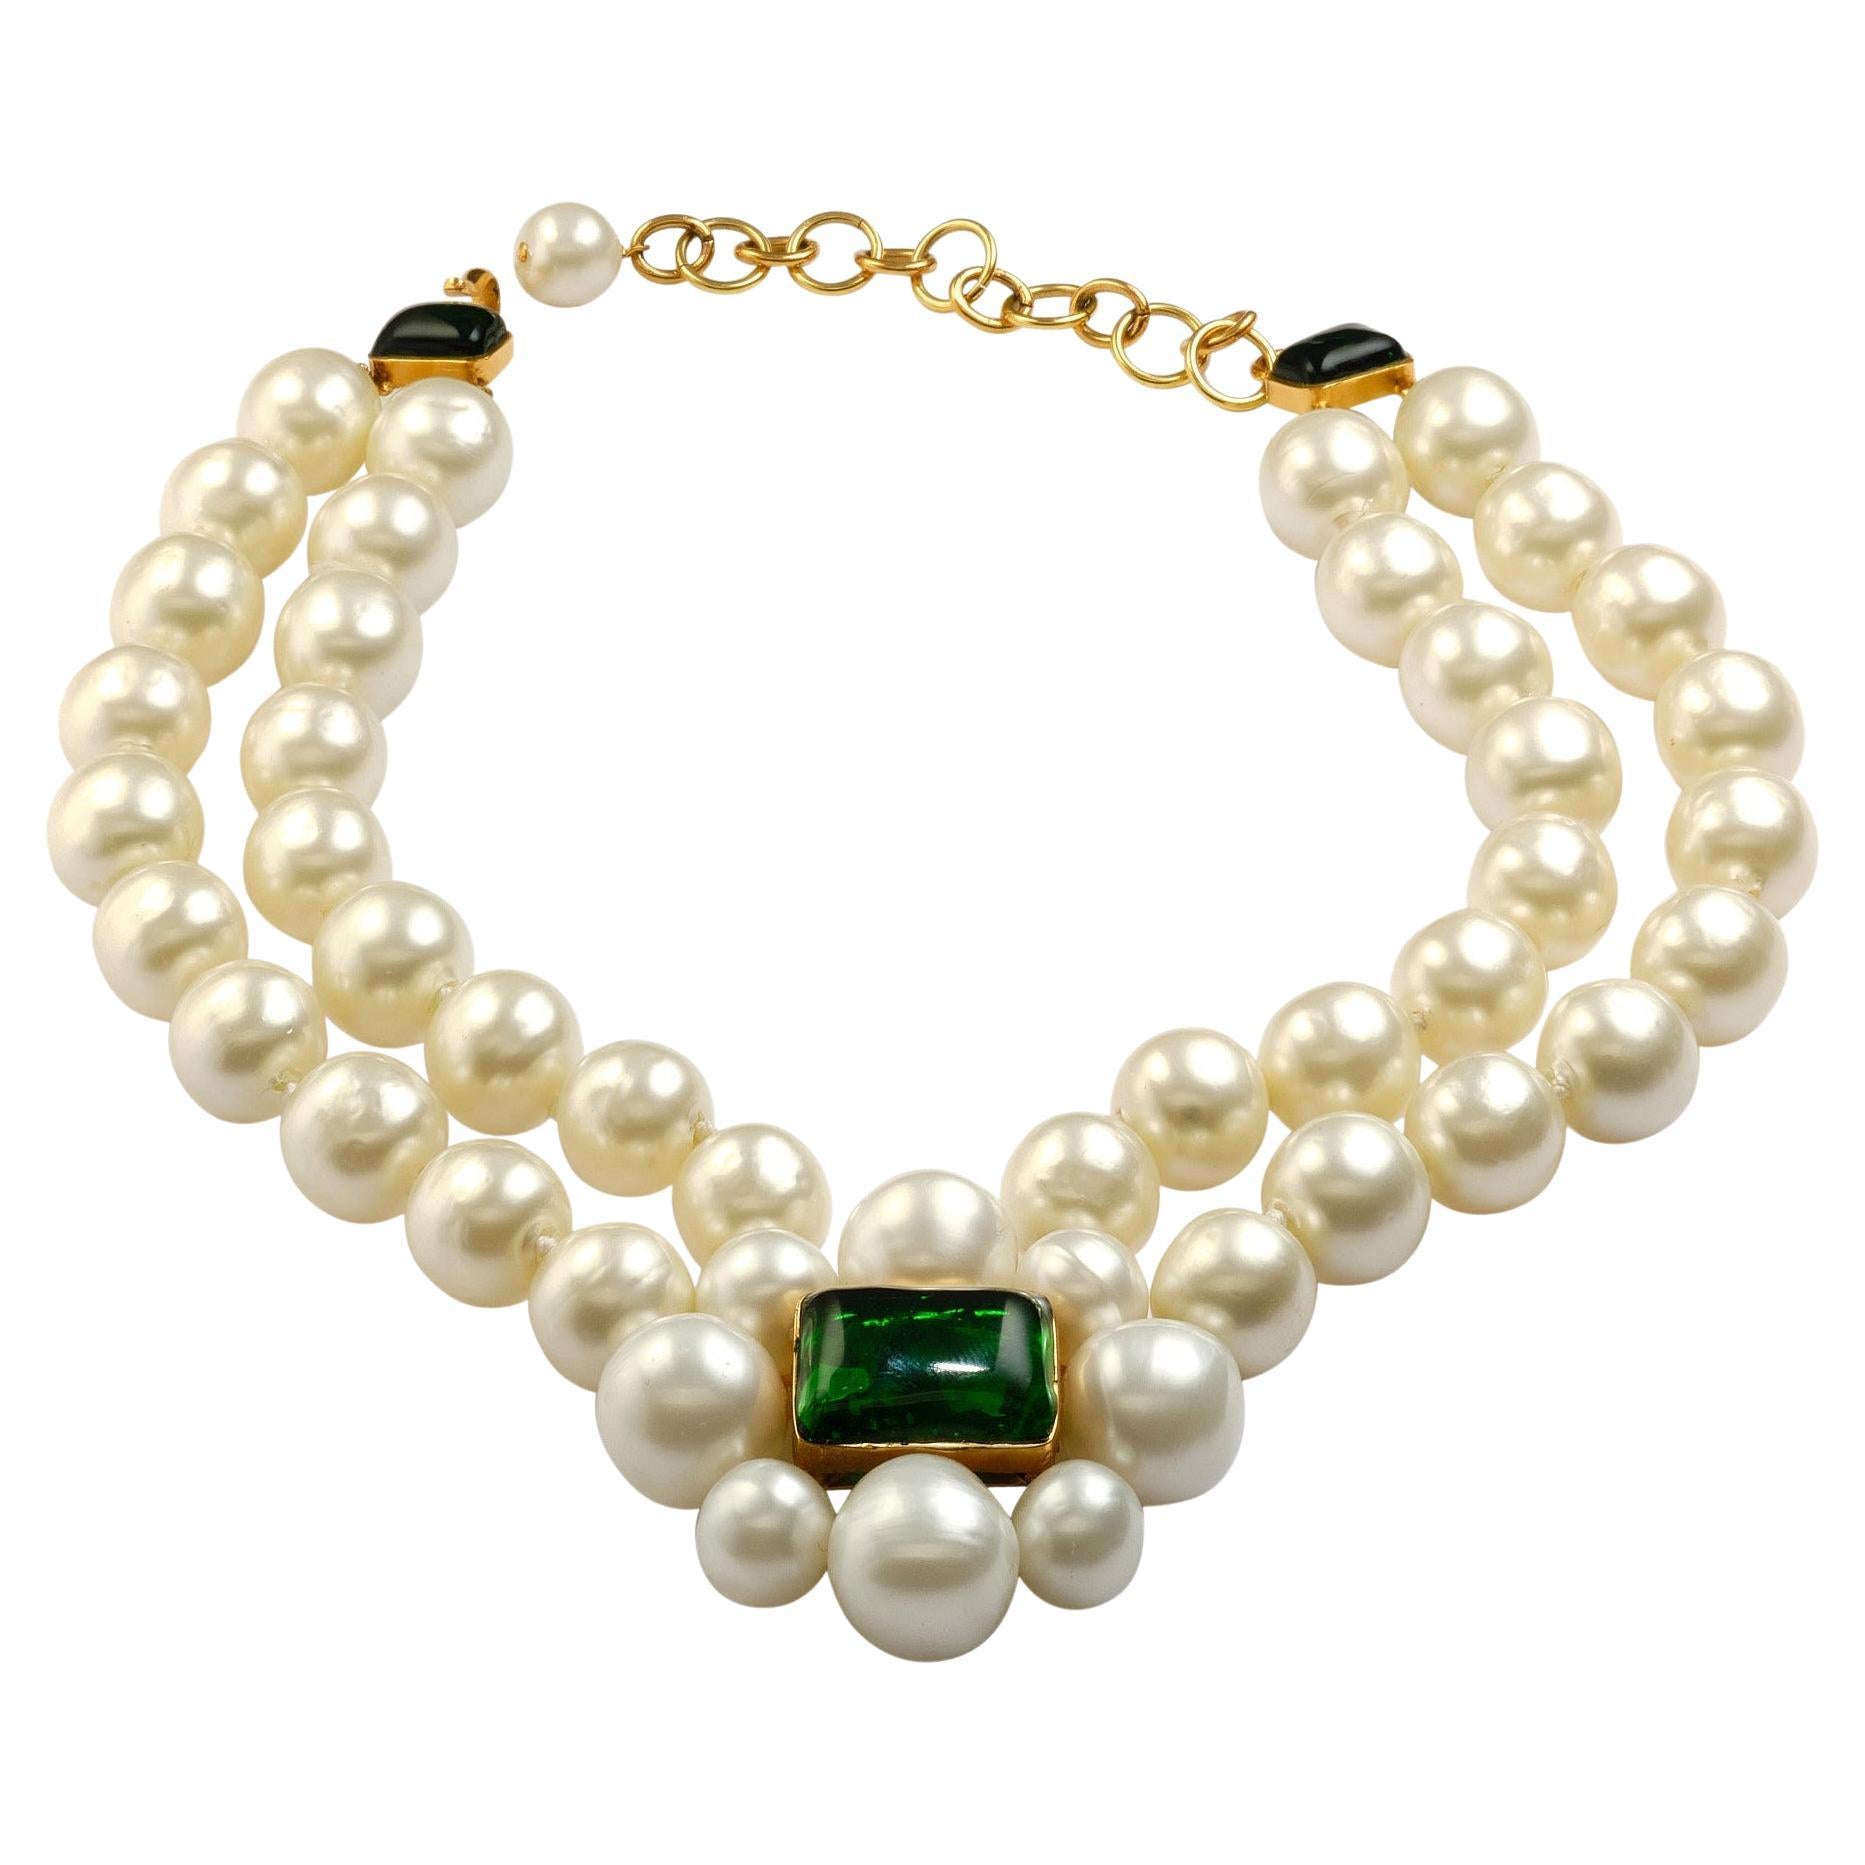 Wonderful CHANEL necklace  (MADE IN FRANCE)  with very large knotted handmade  pearls. In the middle there is a camellia made of 8 pearls with a green Gripoix glass stone in the middle. As a clasp the same Gripoix in green with hook and eye and 10